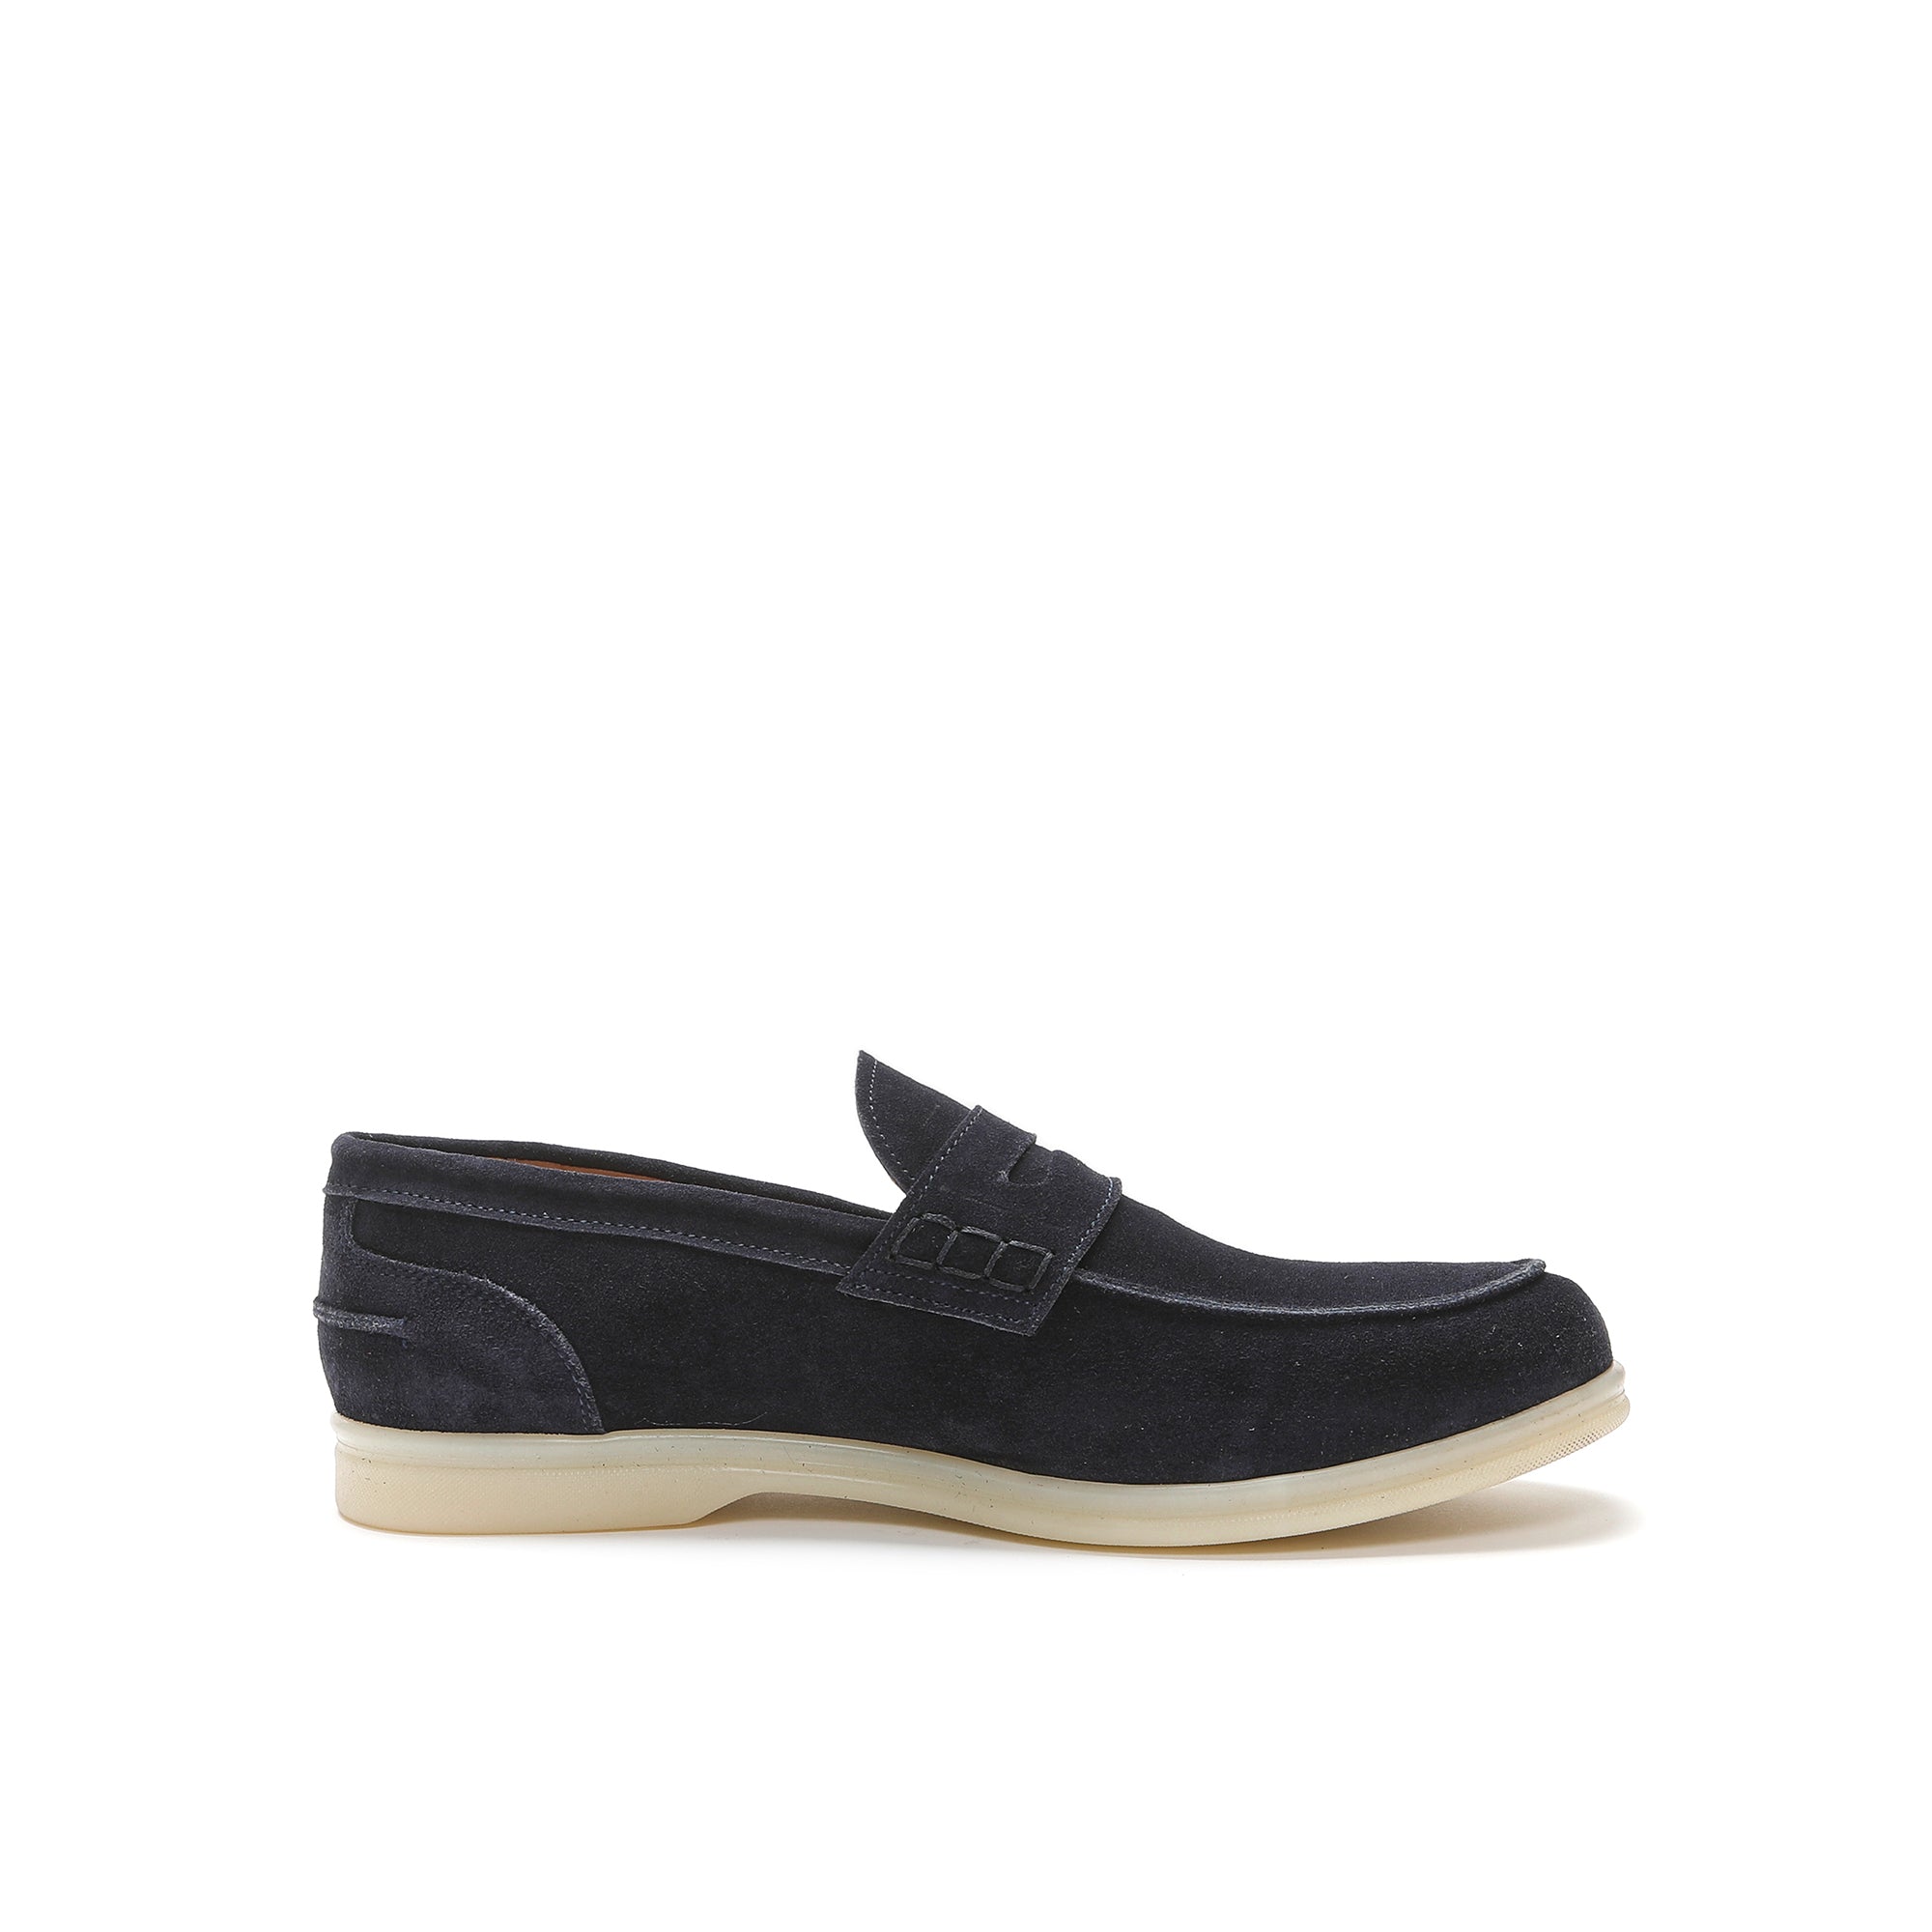 Moccasin navy